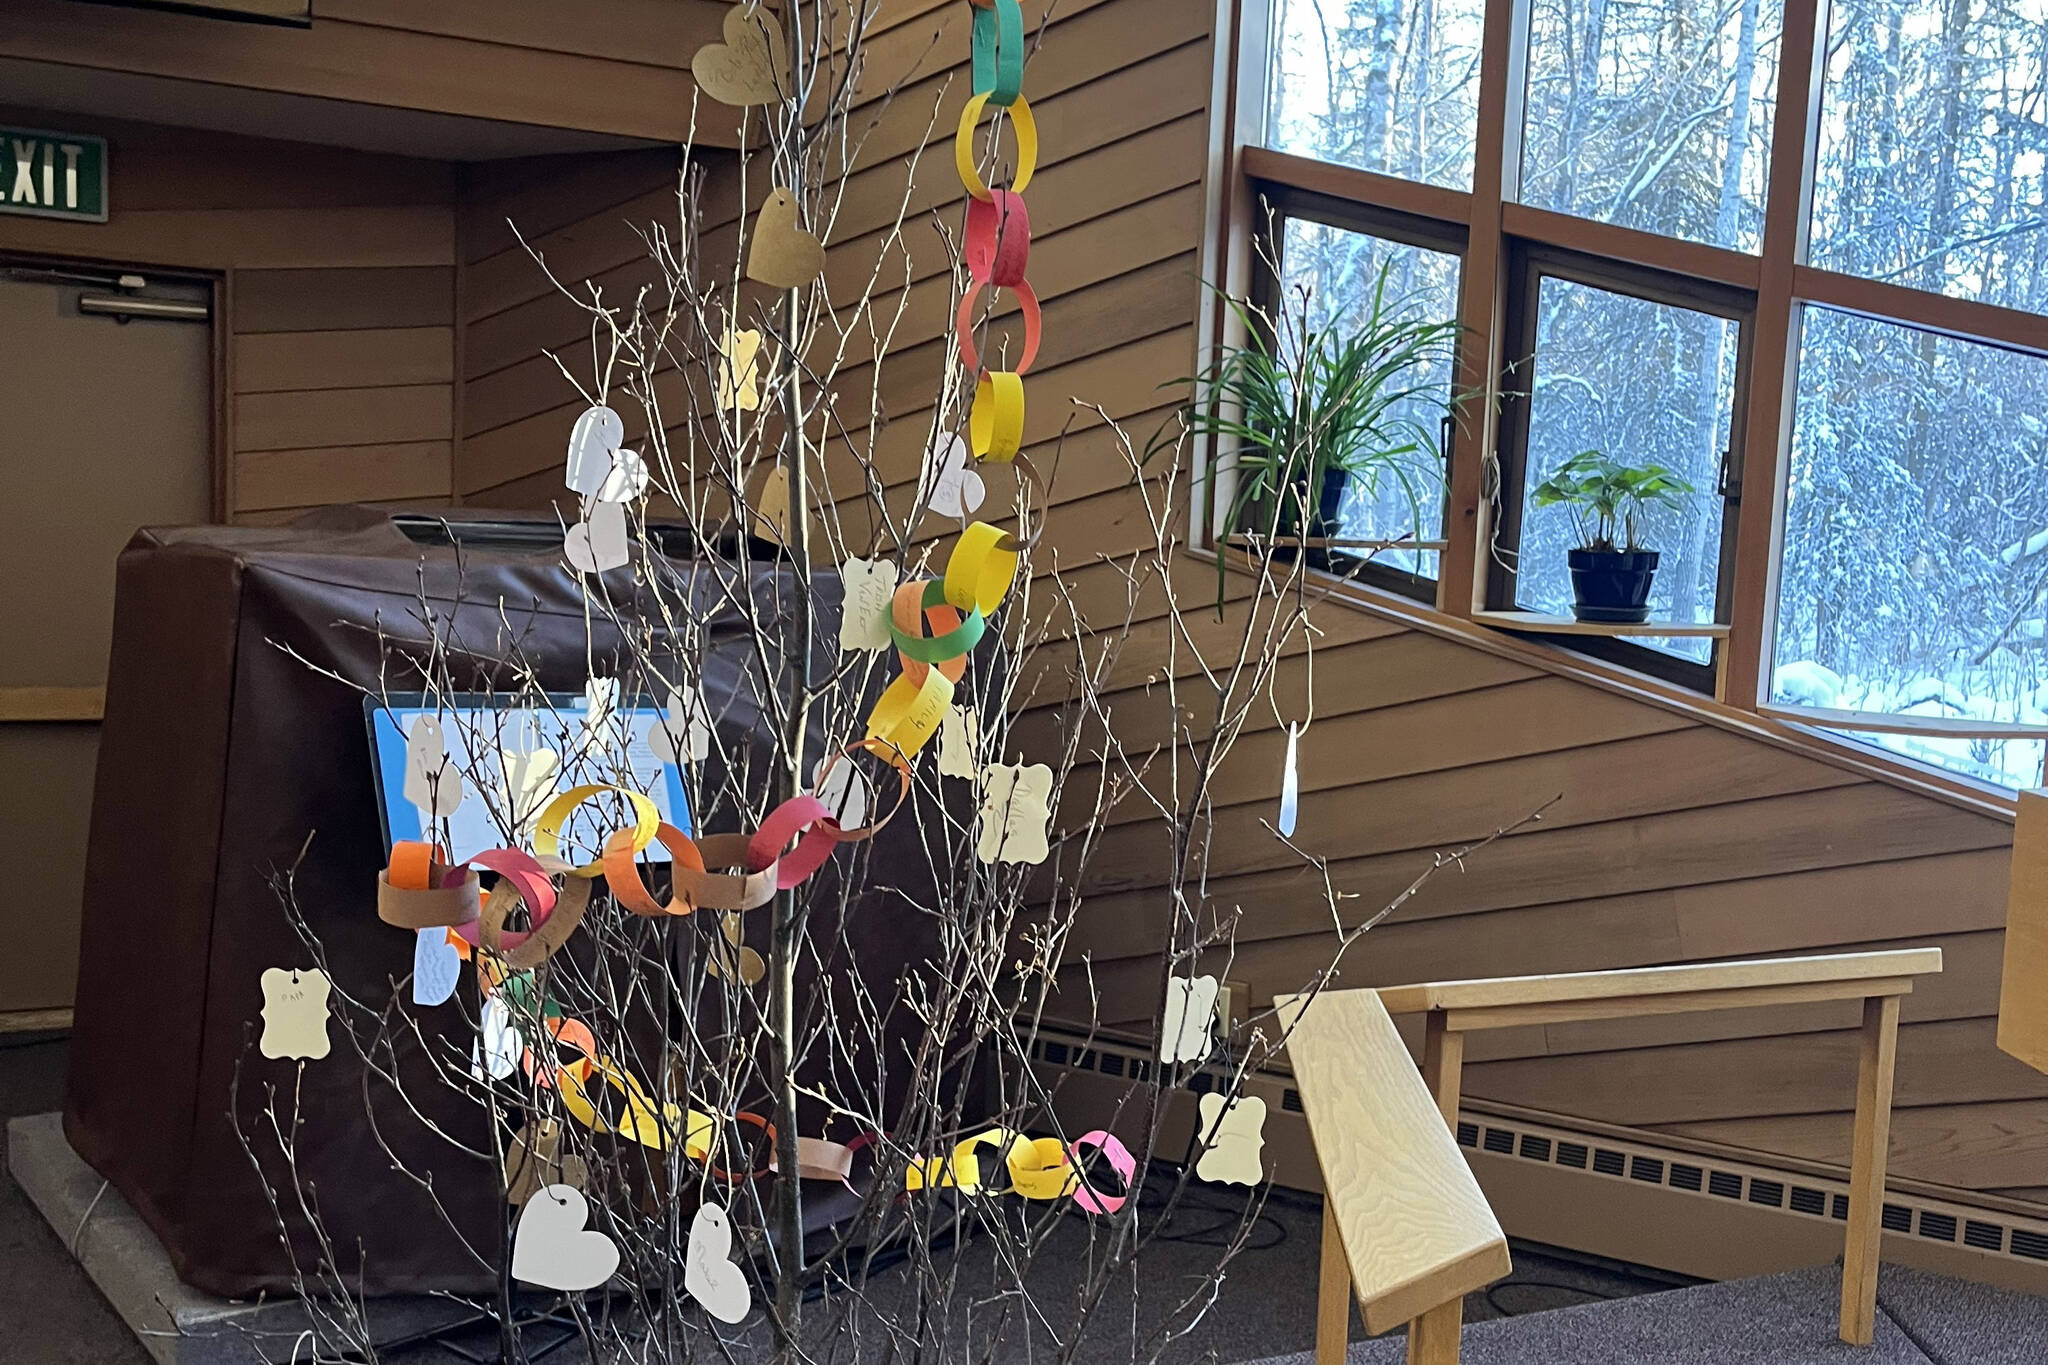 Paper chains made of gratitude strips adorn a Christmas tree at Christ Lutheran Church in Soldotna. (Photo courtesy Meredith Harber)